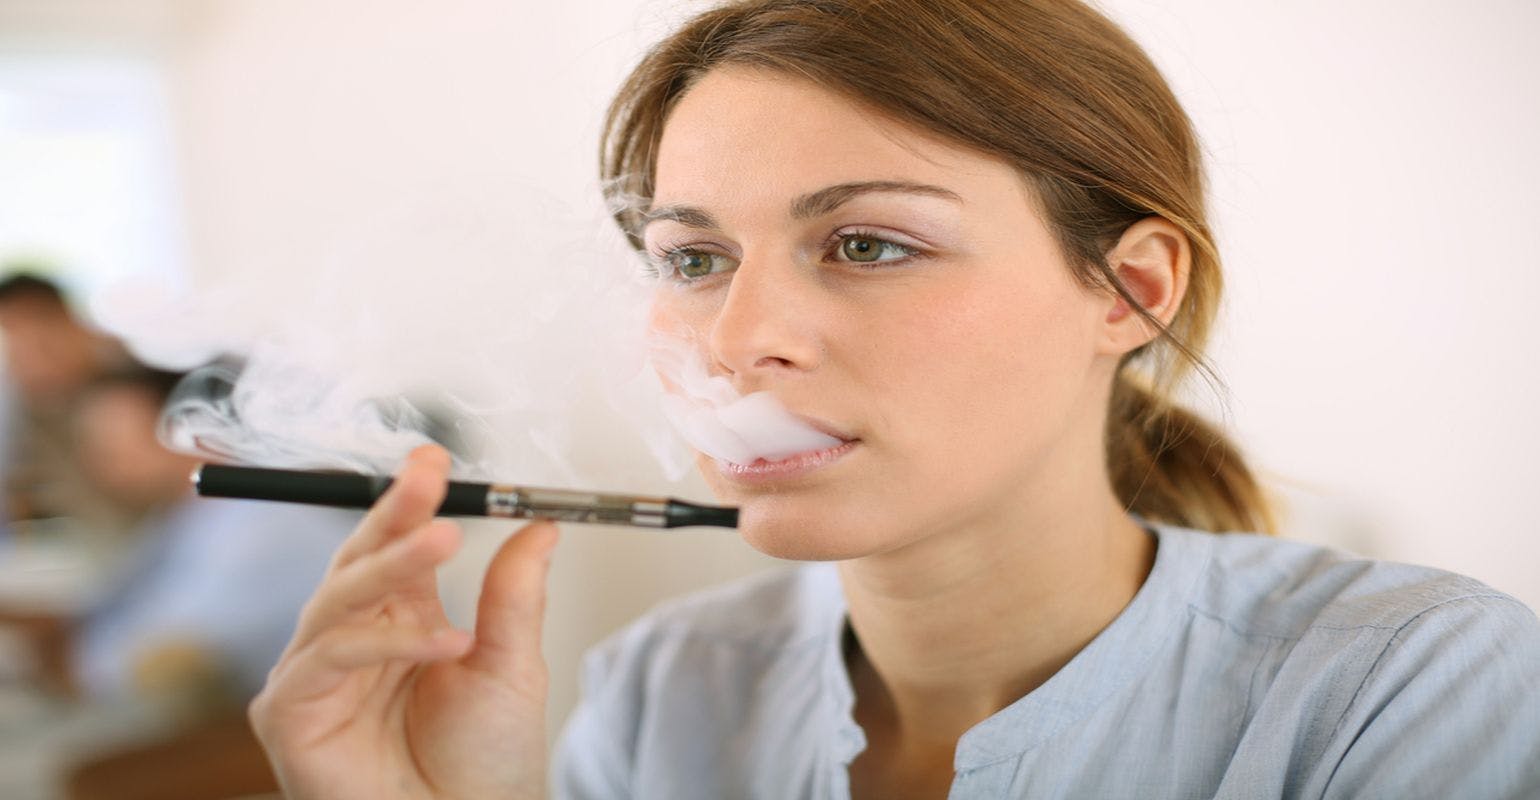 Microbial Contaminants Found in Electronic Cigarettes